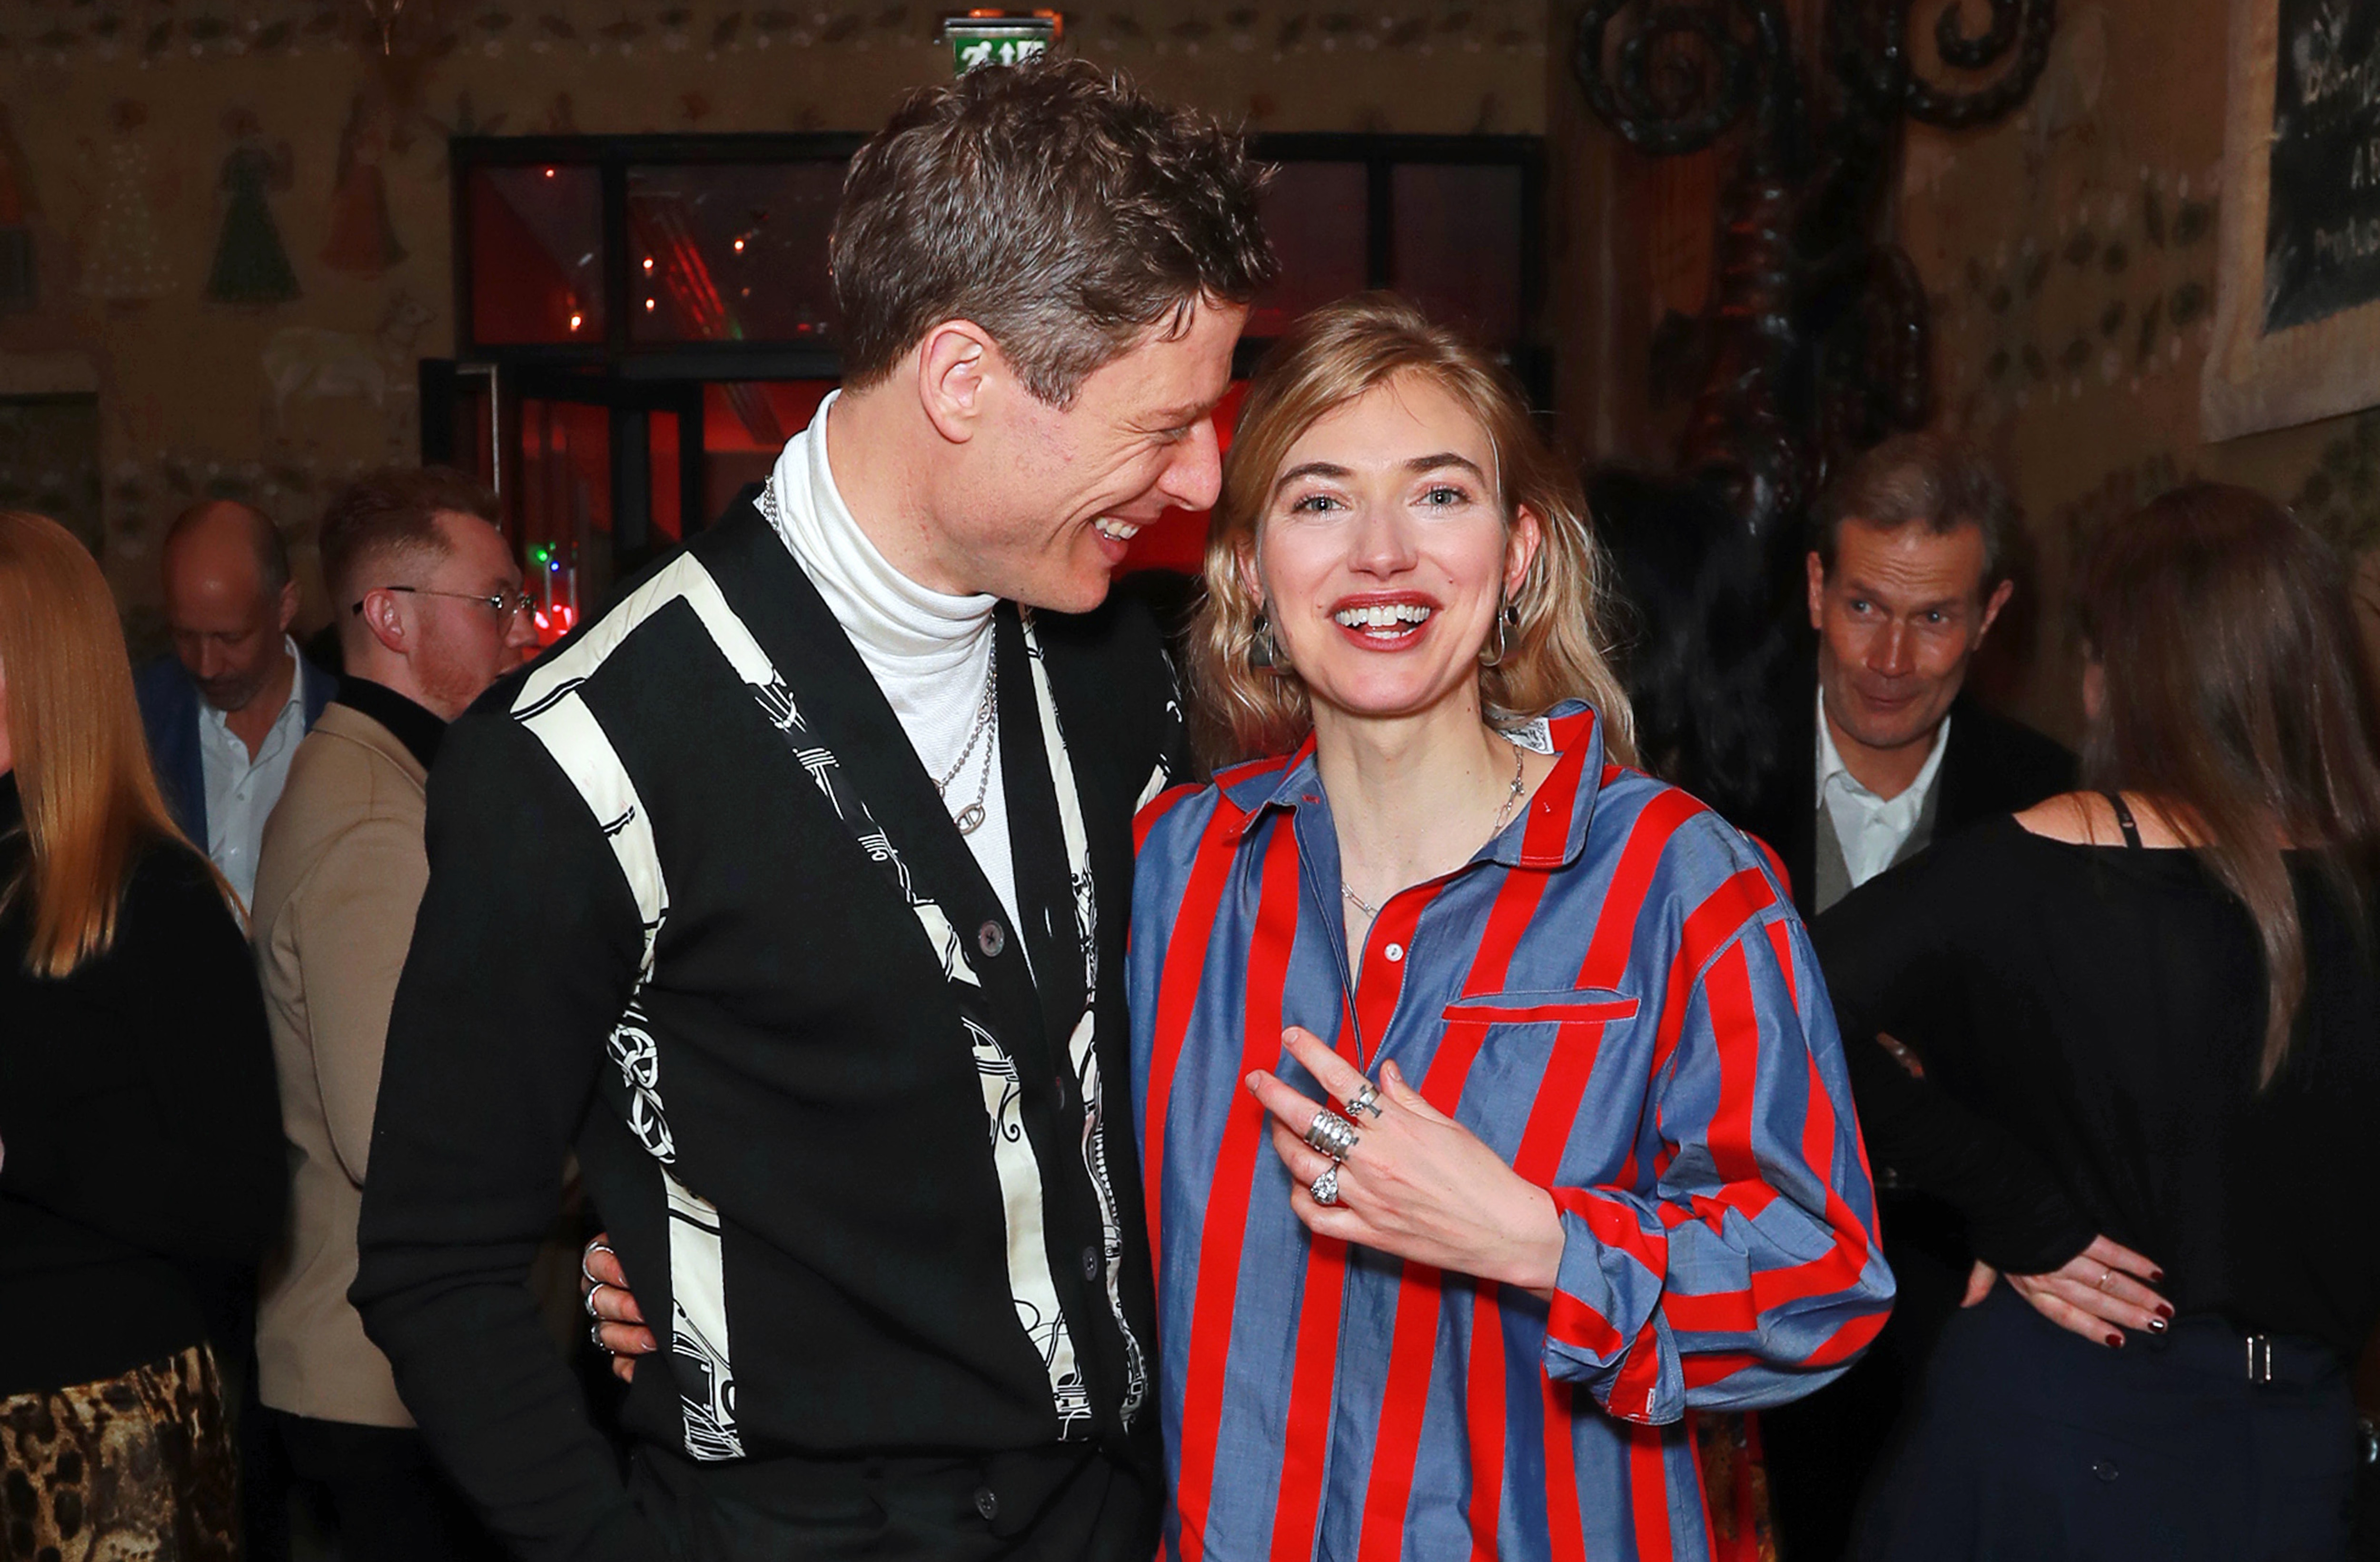 James Norton and Imogen Poots attend the press night after party for "A Little Life" at The Ham Yard Hotel on March 30, 2023, in London, England | Source: Getty Images